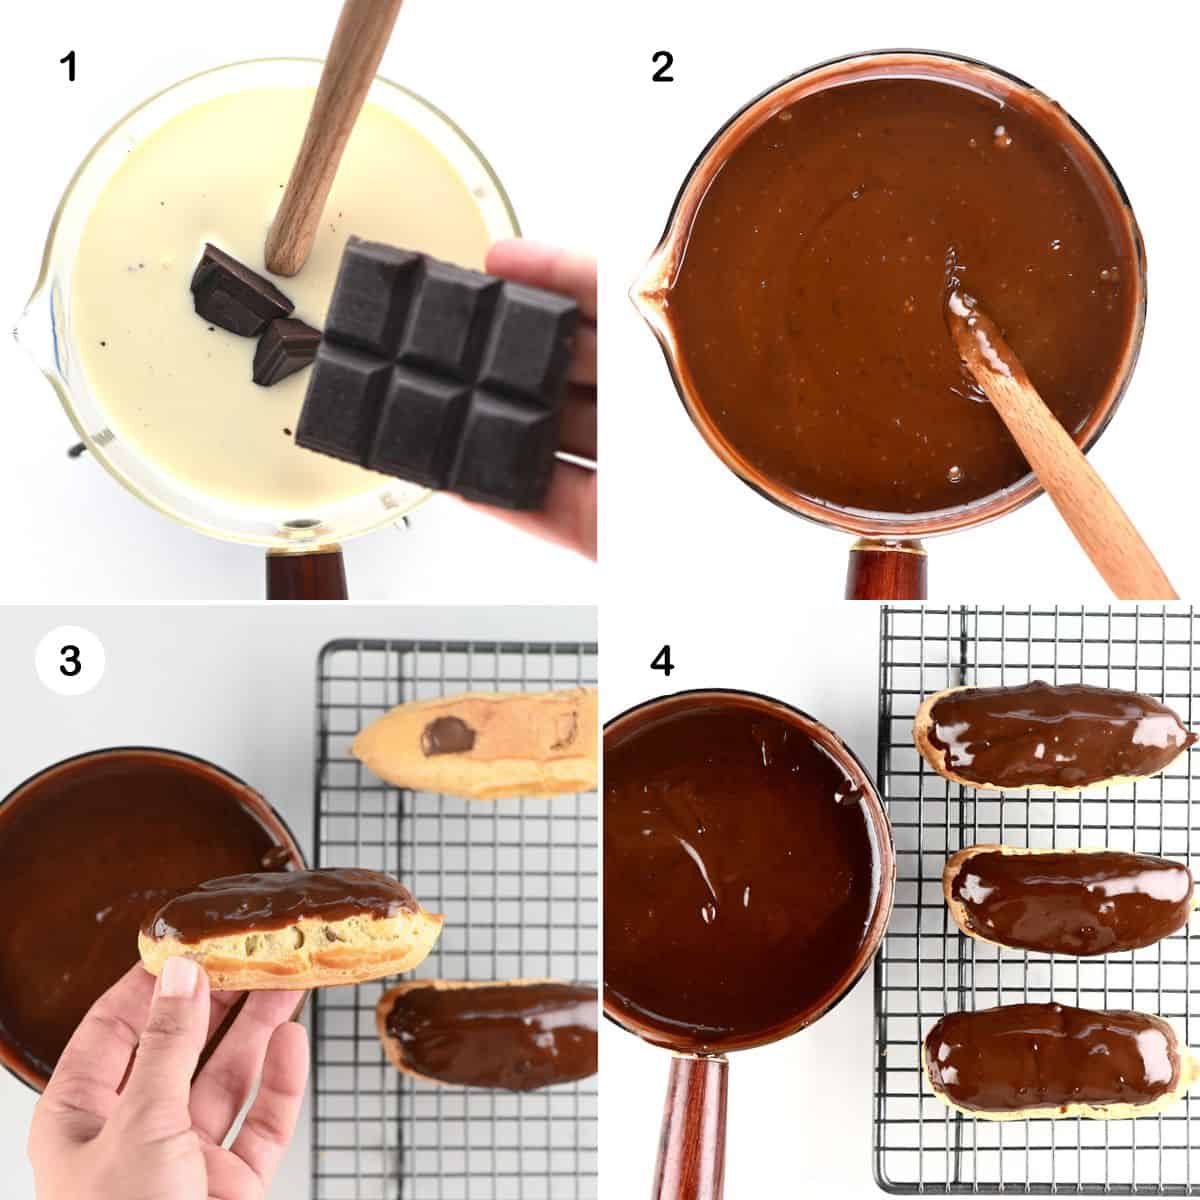 Steps for glazing eclairs